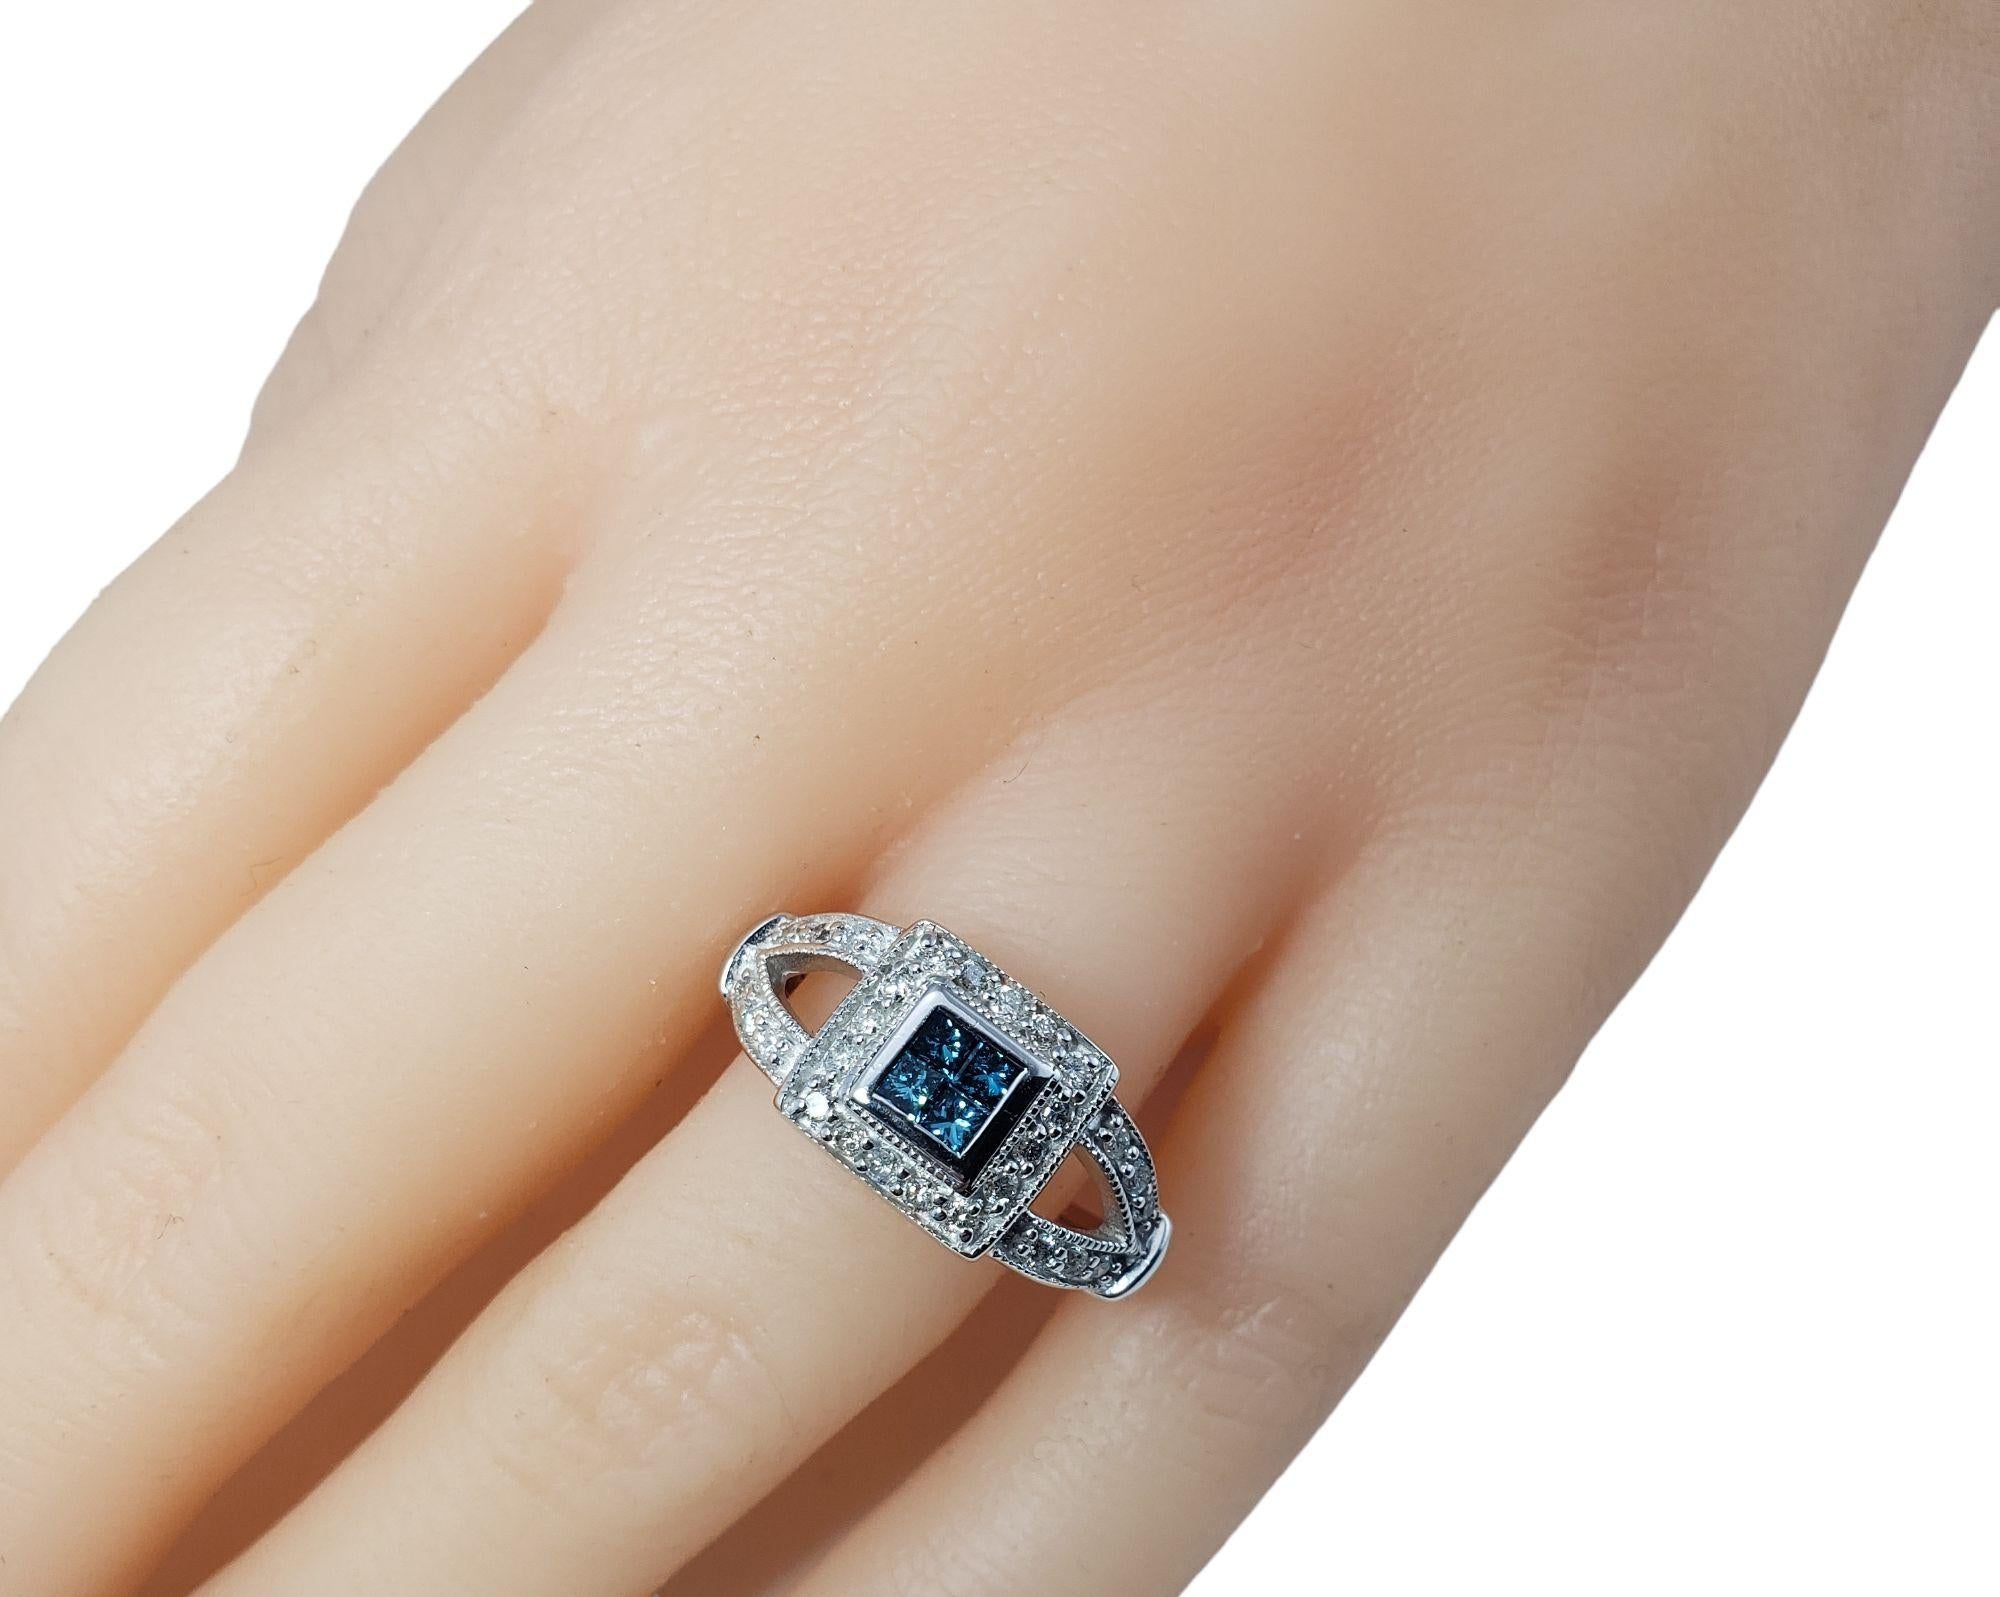 Vintage 14 Karat White Gold Blue (Color Treated) and White Diamond Ring Size 7-

This sparkling ring features four blue color treated princess cut diamonds and 31 round single cut diamonds set in classic 14K white gold. Width: 10 mm. Shank: 3